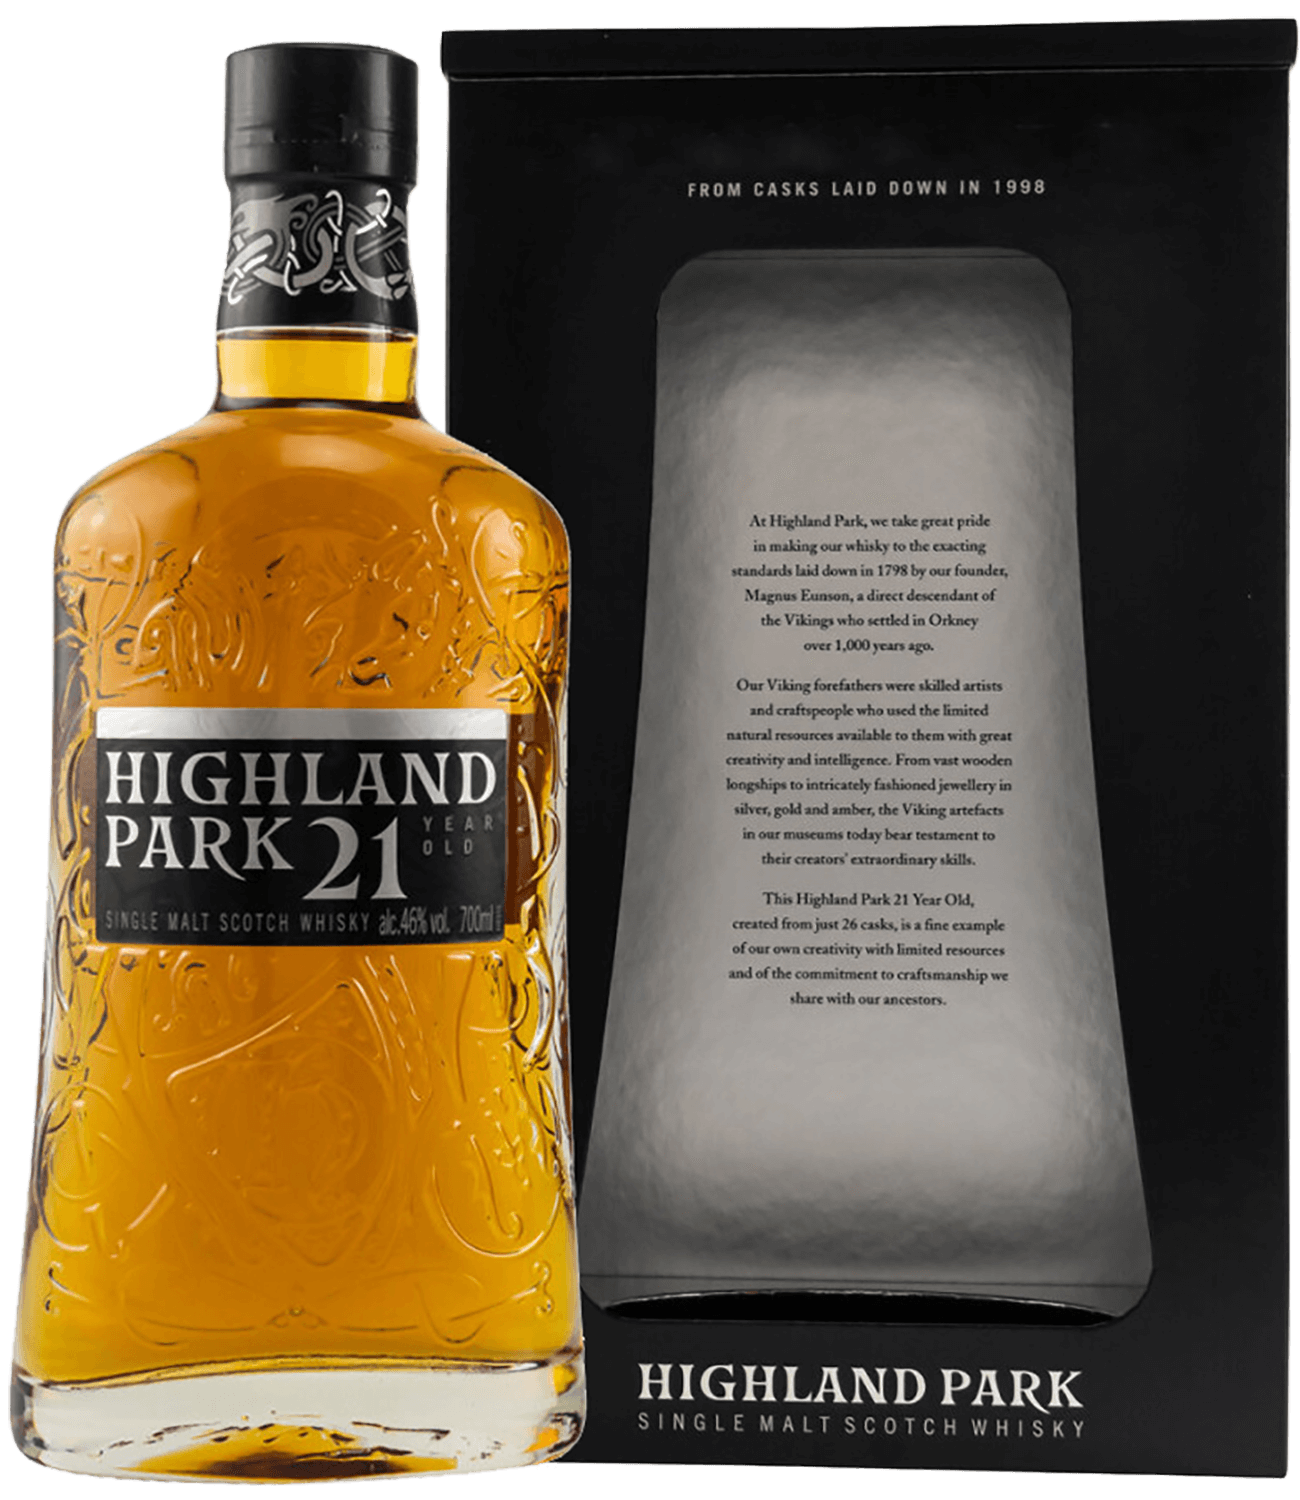 Highland Park 21 Years Old Single Malt Scotch Whisky (gift box) fettercairn single malt scotch whisky 22 years old gift box